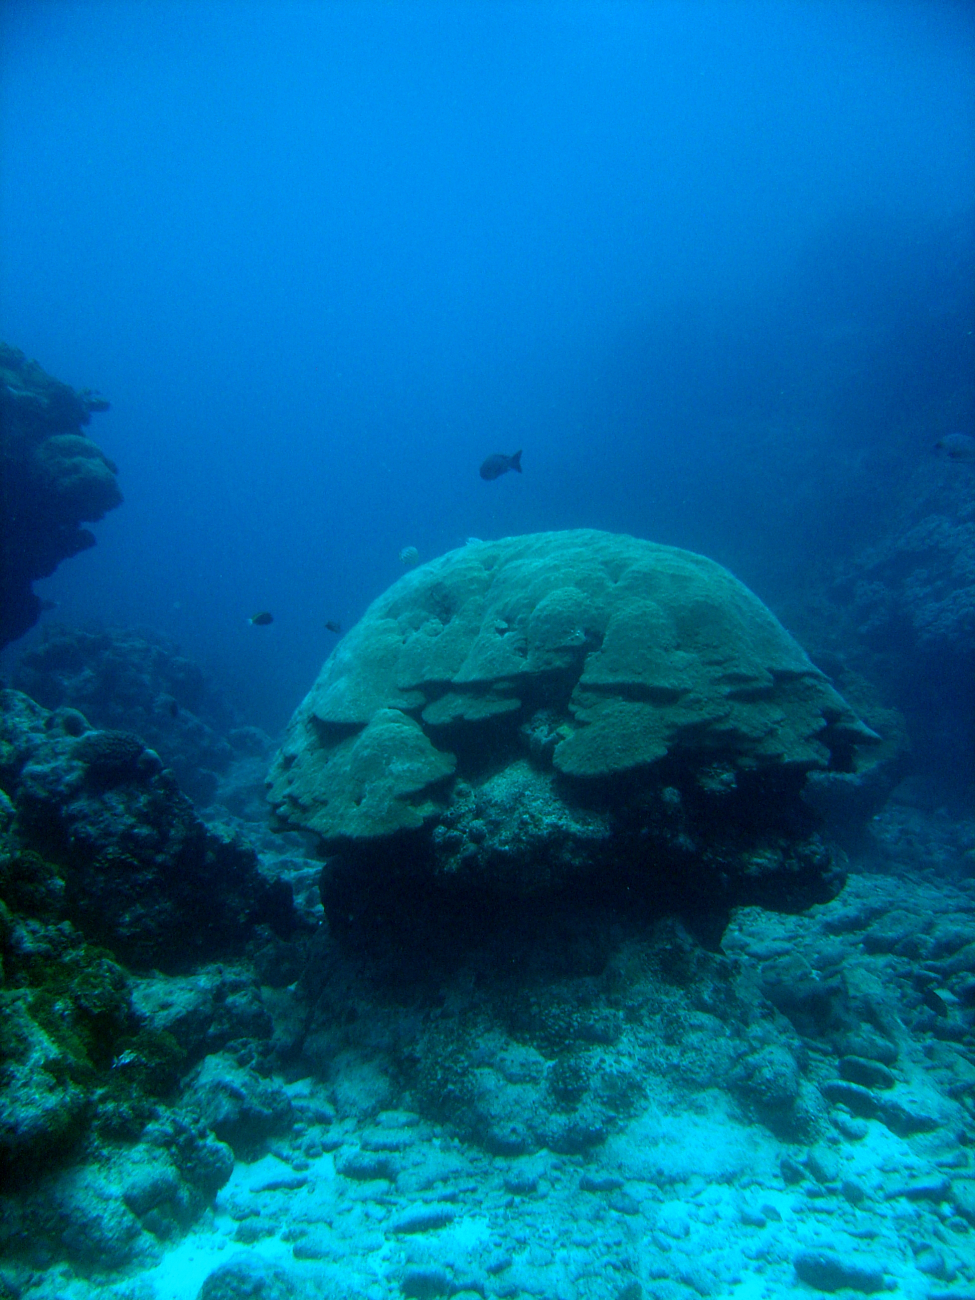 Large mushroom shaped coral with reef fish